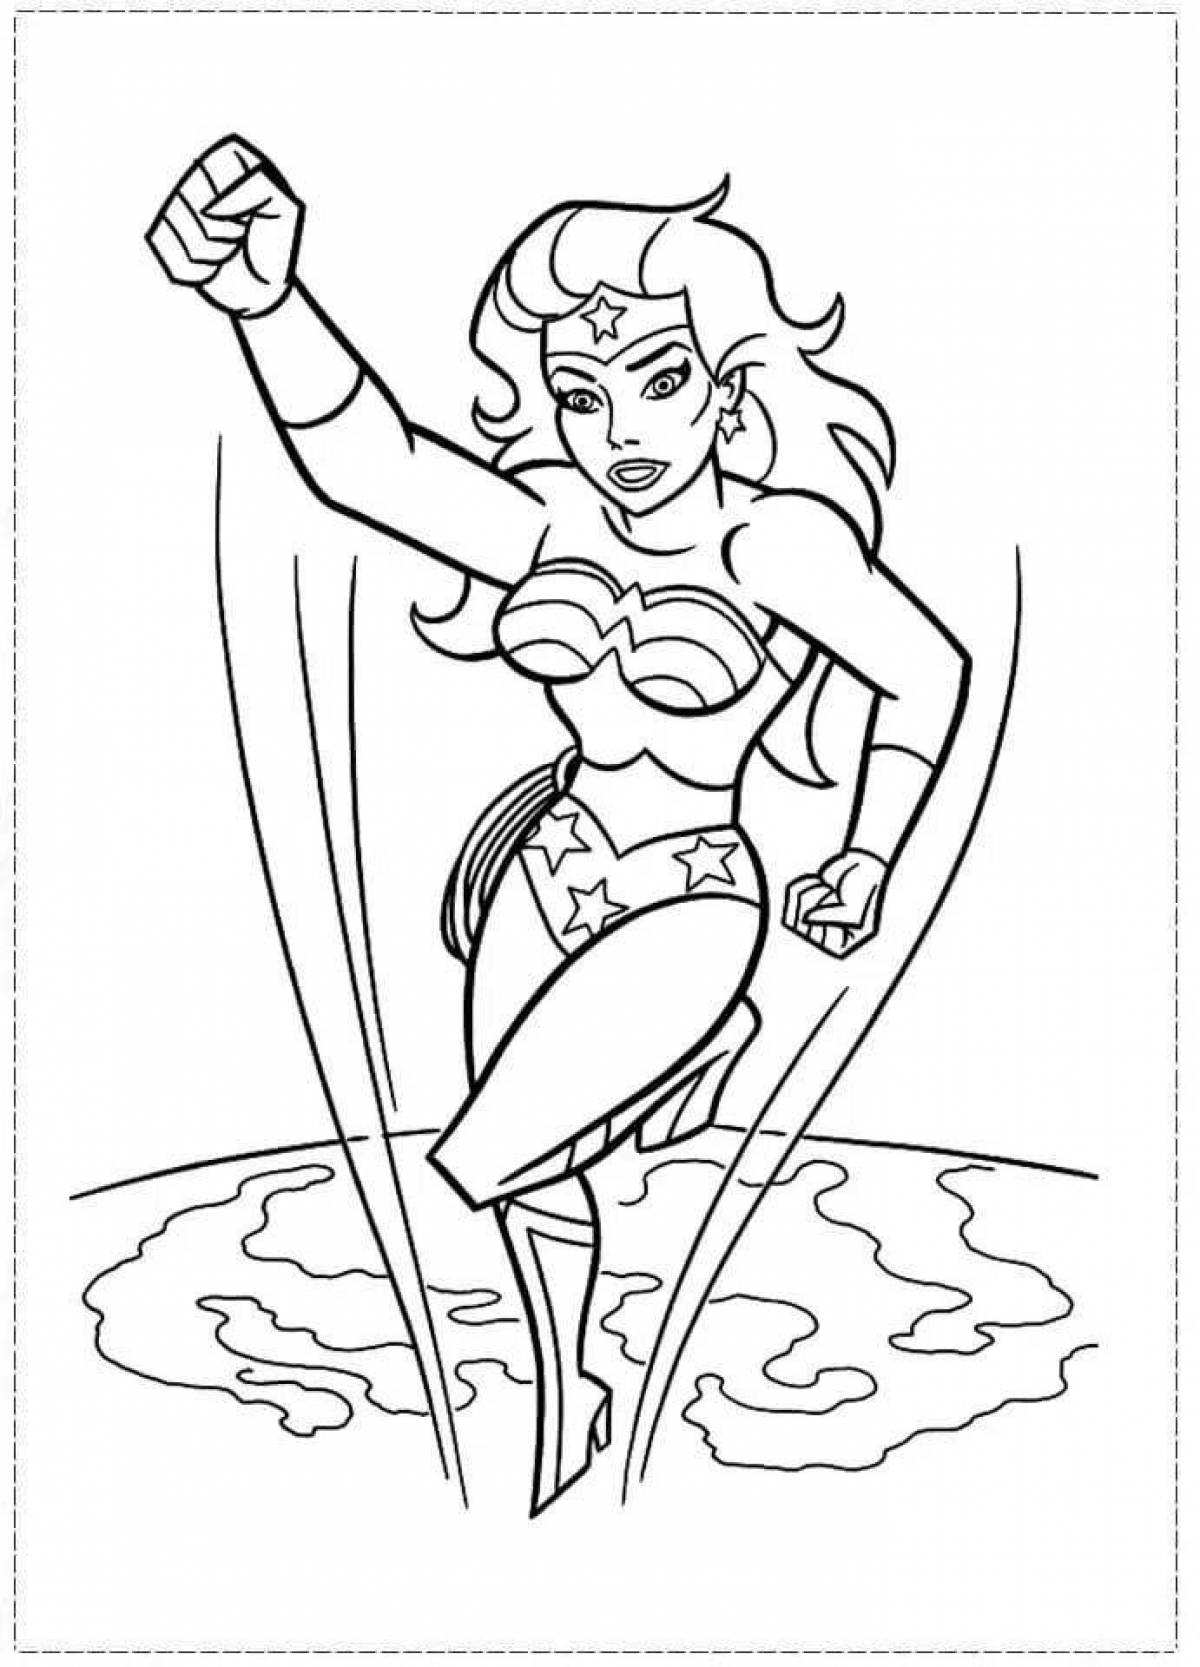 Great marvel coloring page